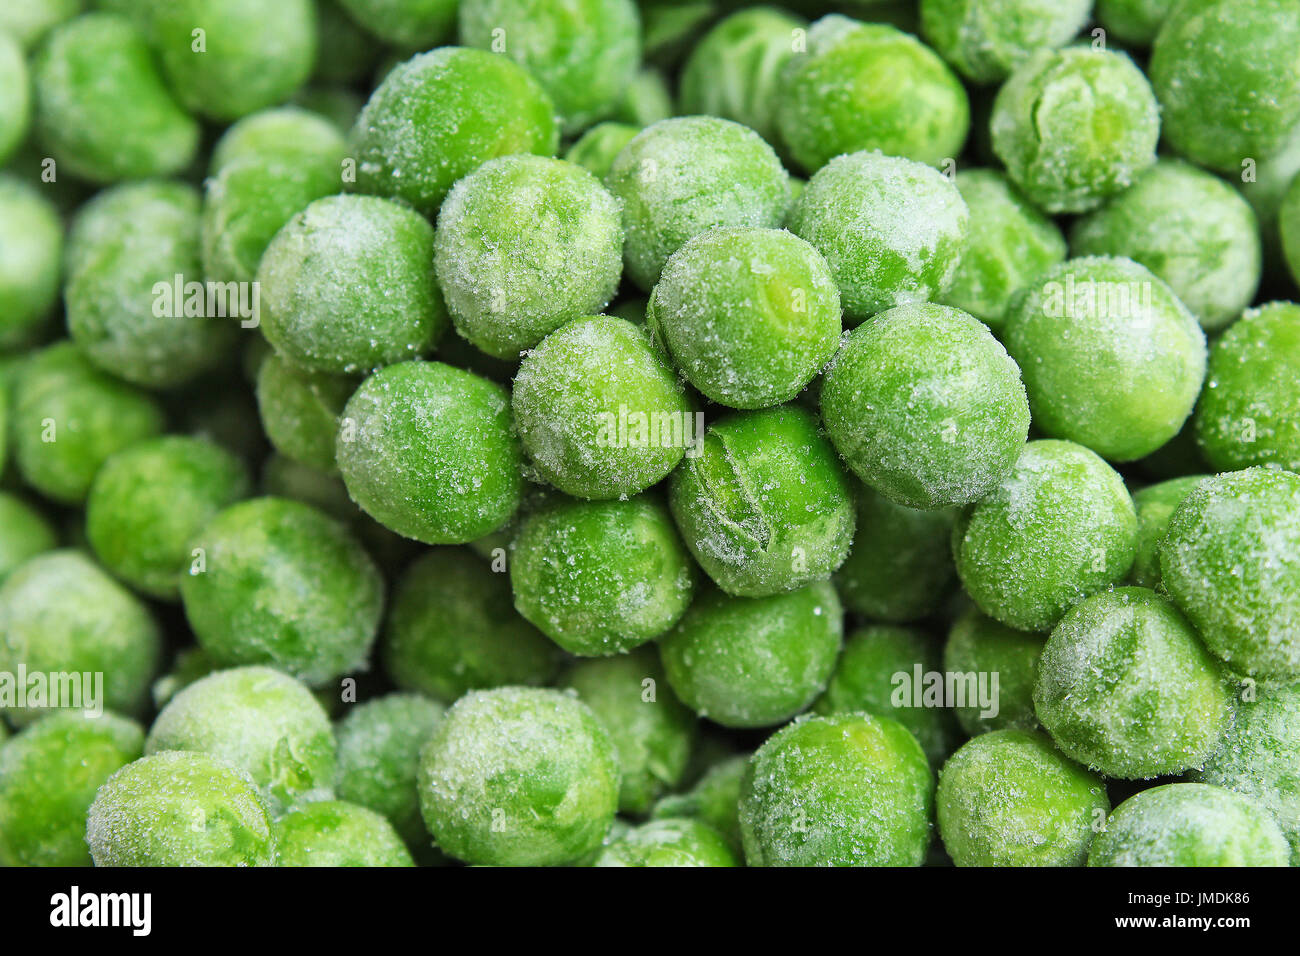 Frozen pea peases texture background. Green pease background pattern. Stock Photo